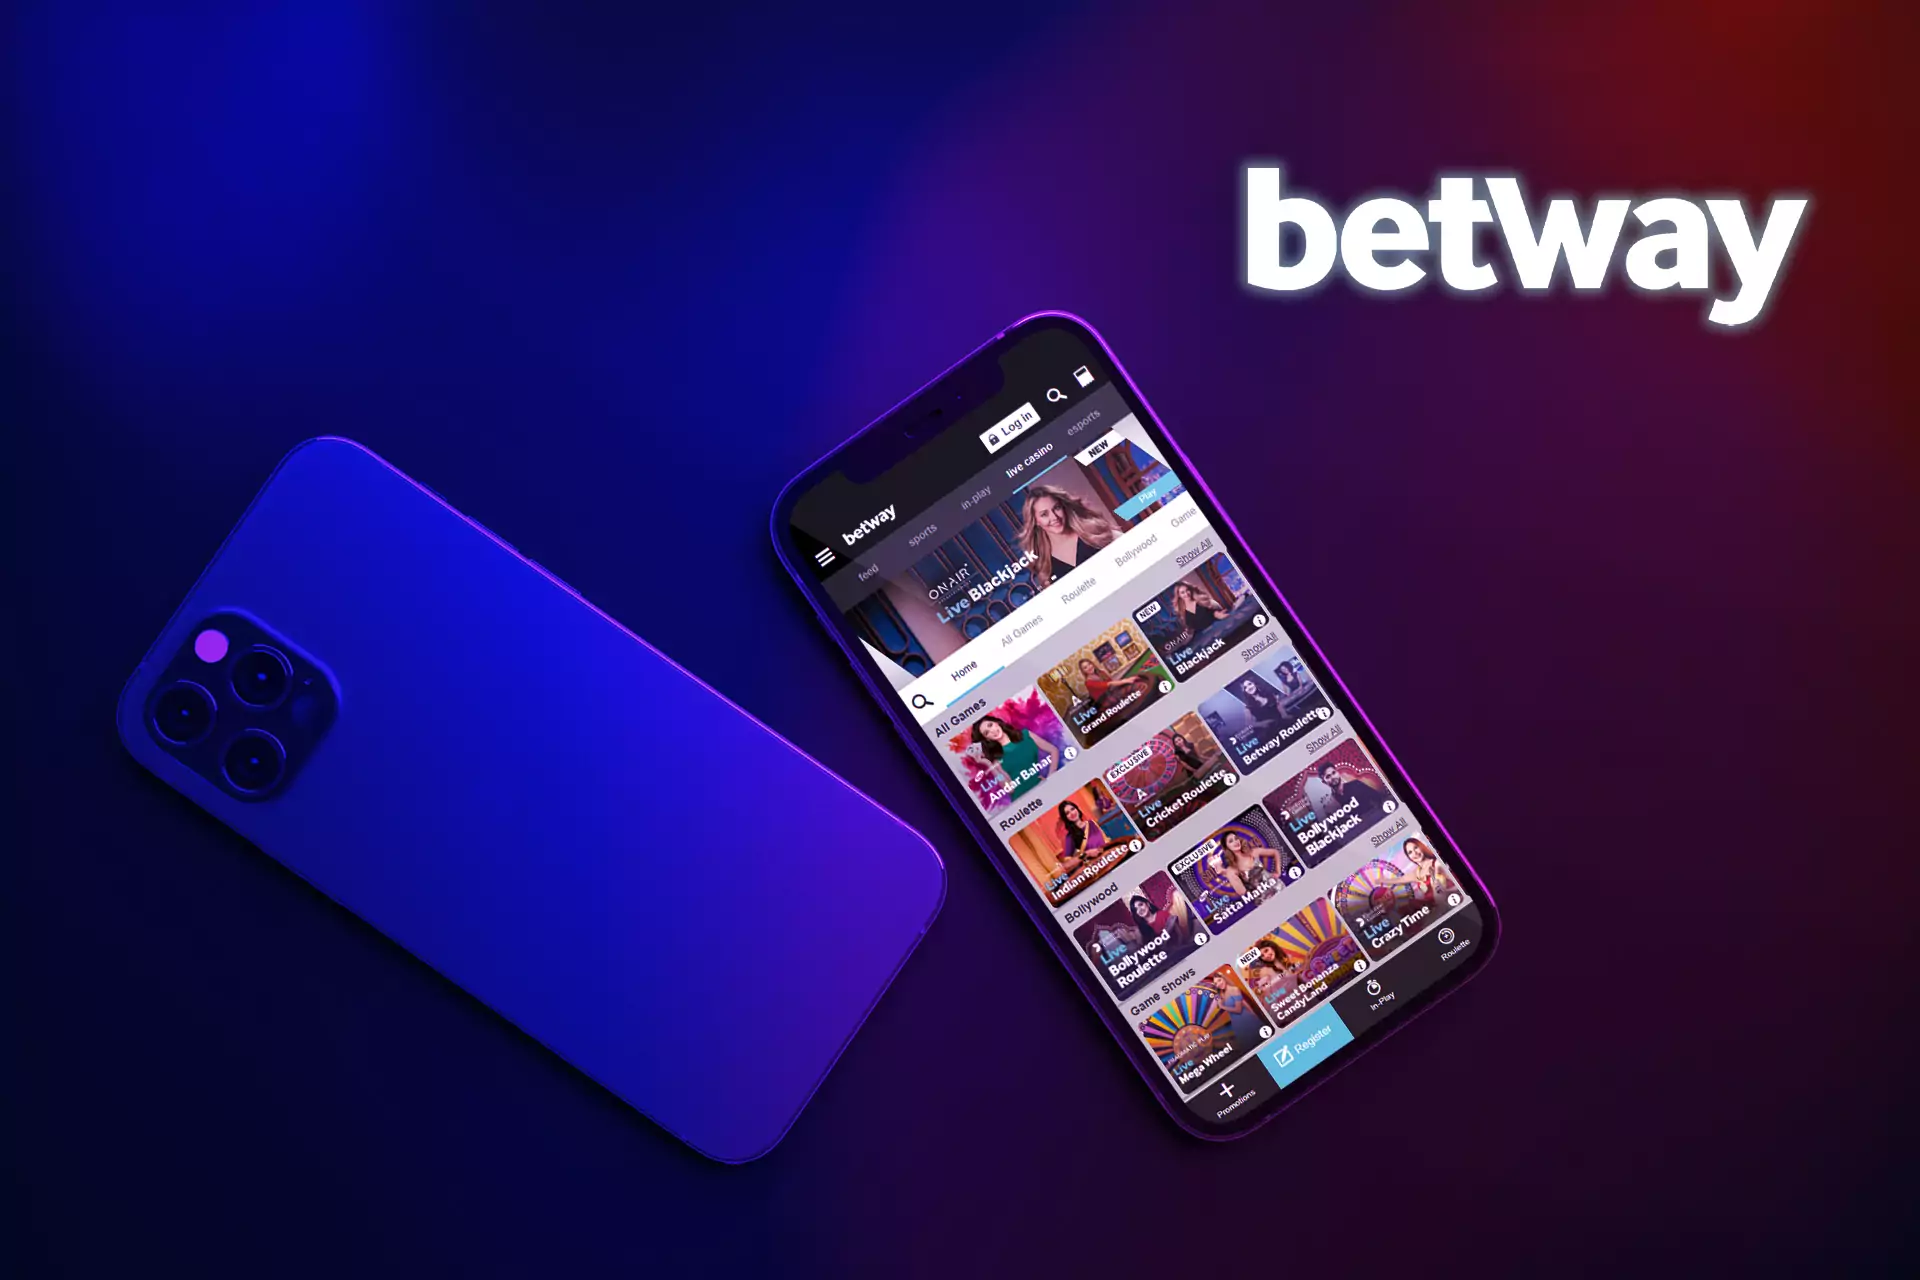 Betway is a well-known and trustworthy bookmaker who provides playing casino games as well.